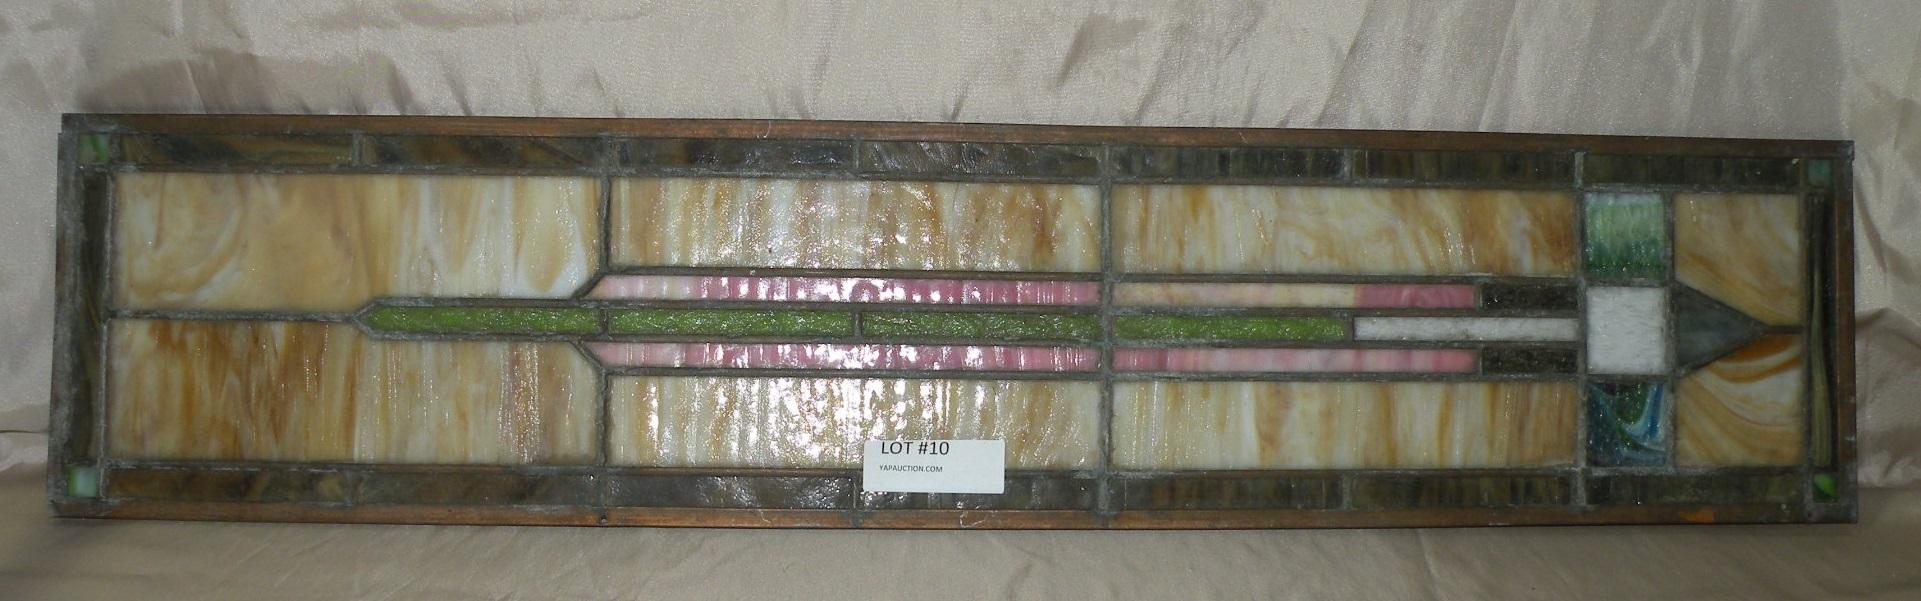 FRAMED STAINED GLASS WINDOW INSERT - WILL NOT SHIP